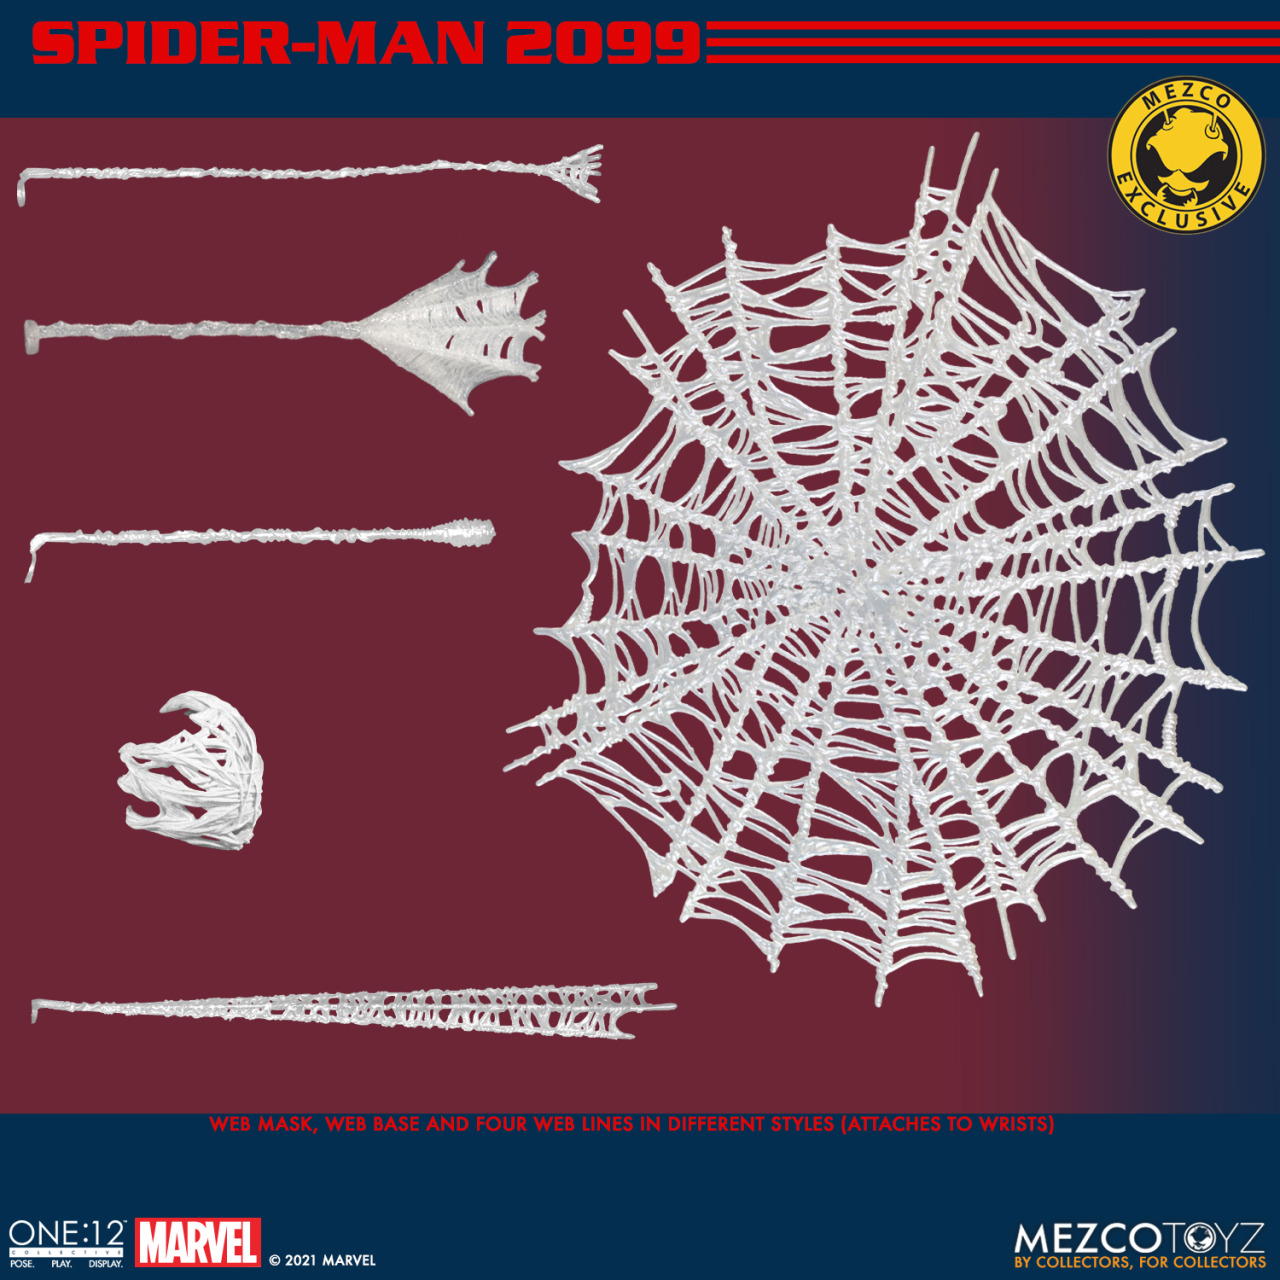 Fears Magazine — One:12 Collective Spider-Man 2099 from MEZCO TOYZ